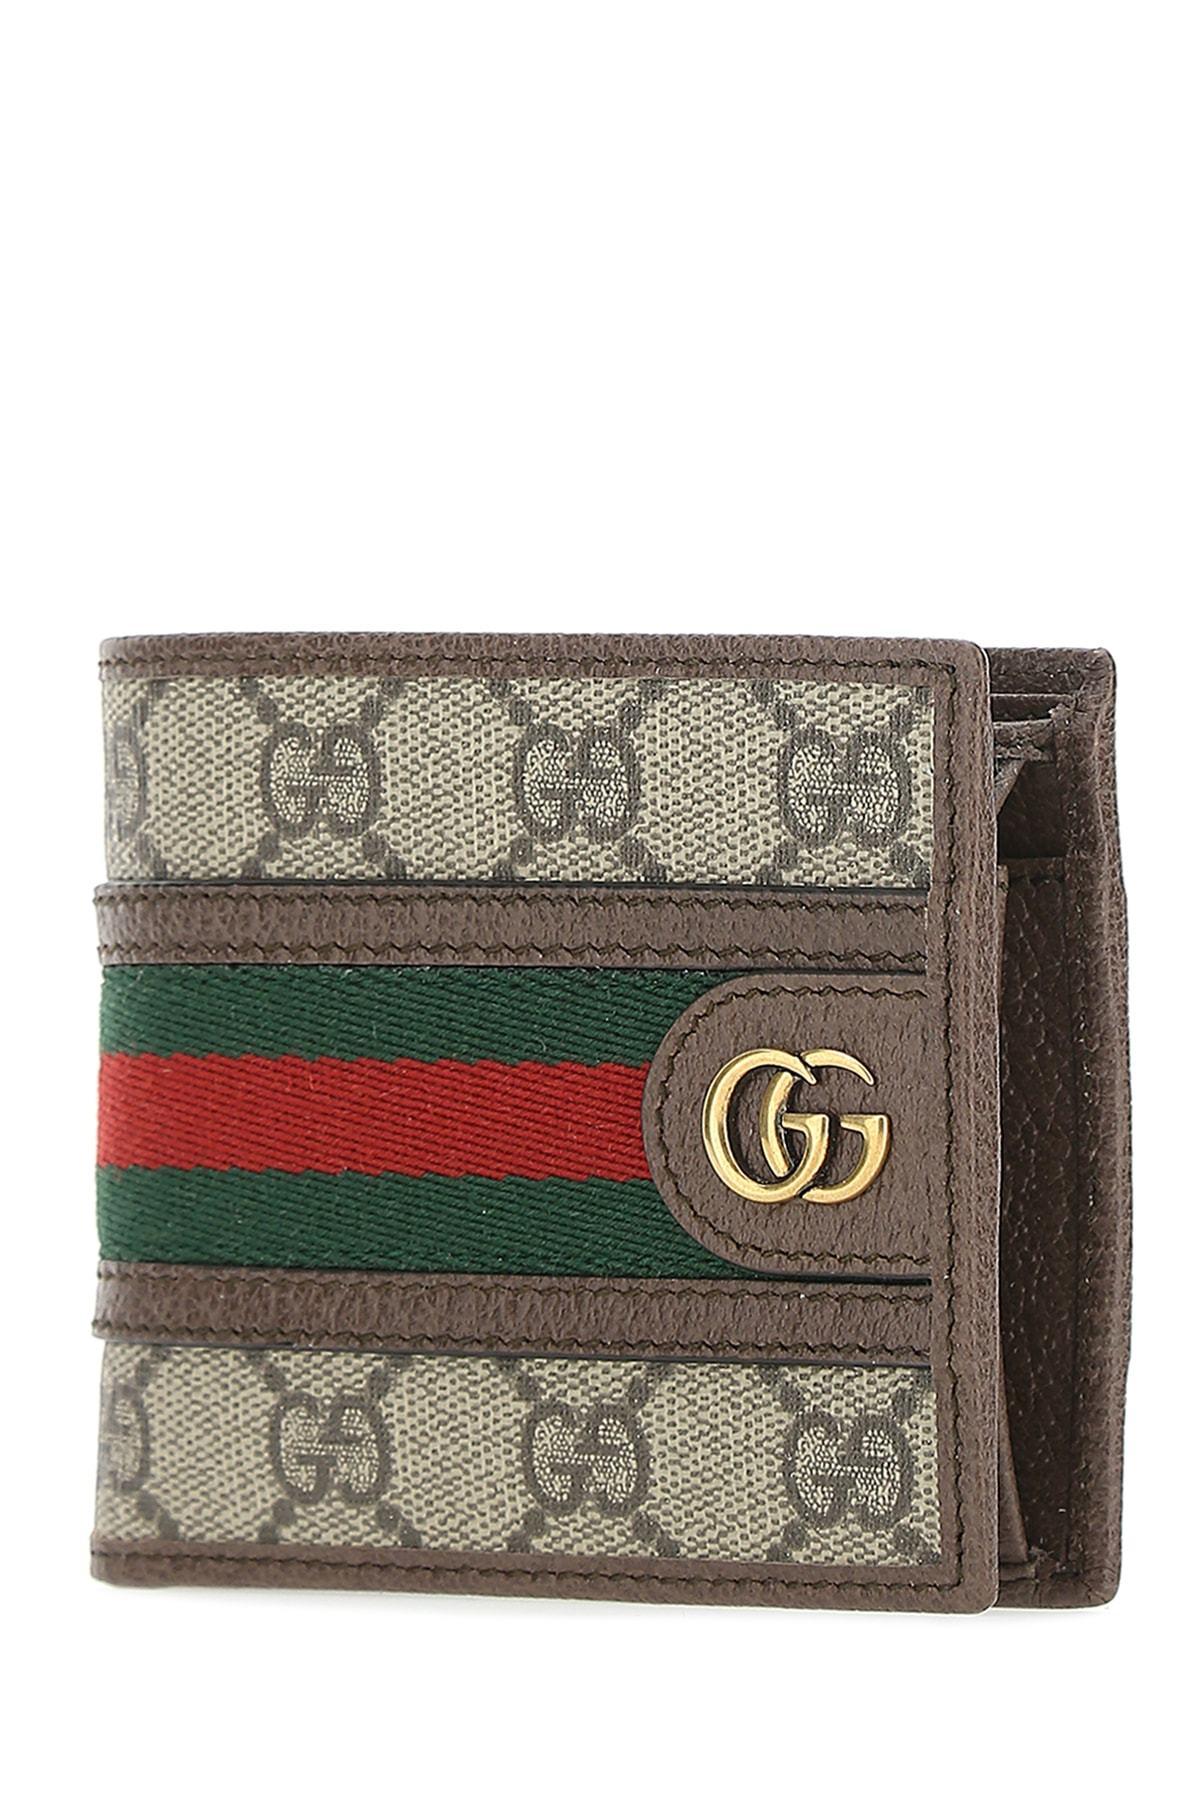 Gucci Canvas Wallet With Three Little 